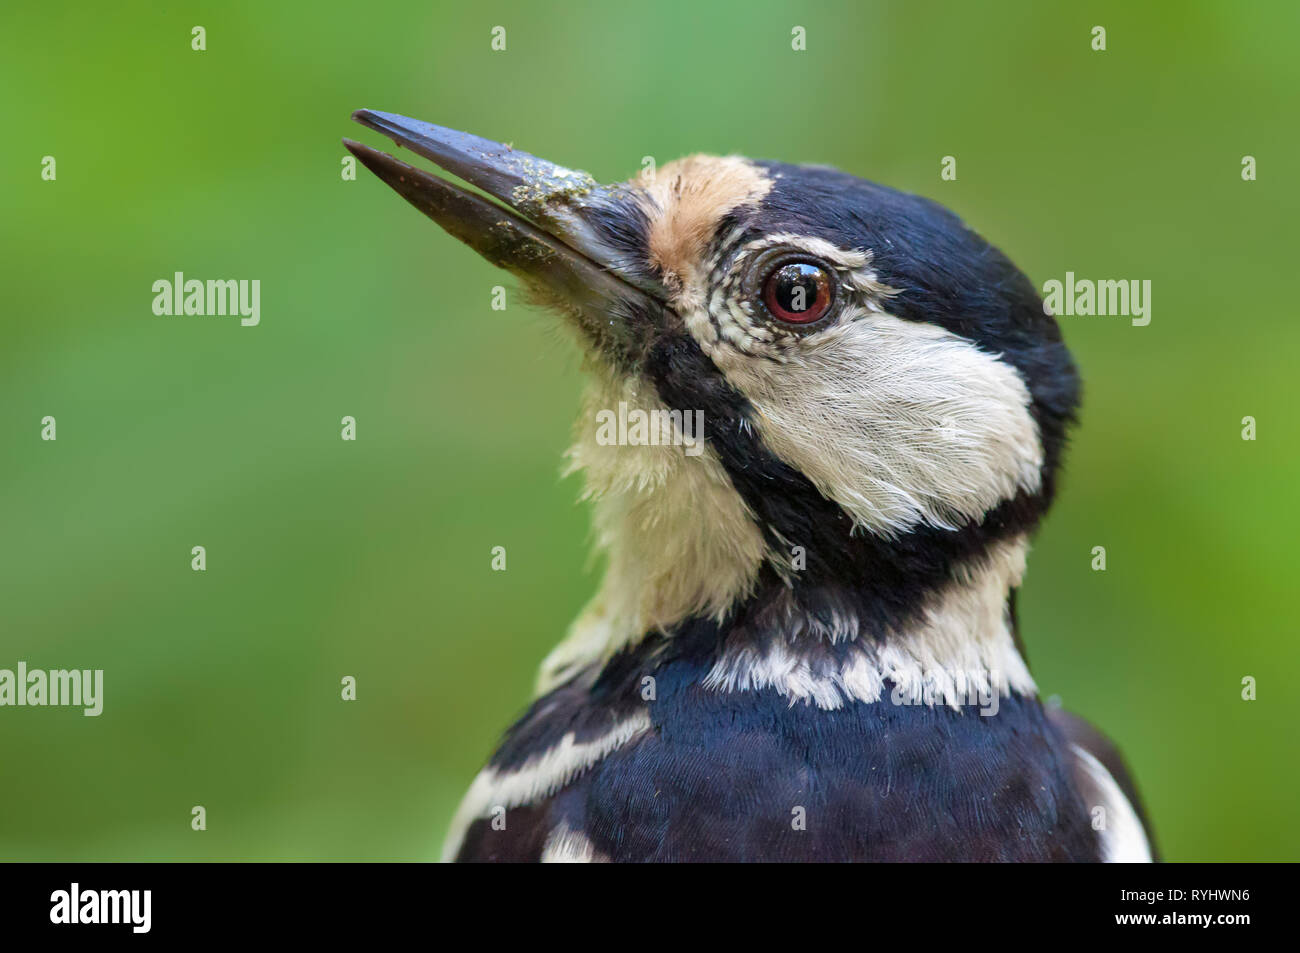 Great spotted woodpecker female portrait from close distance Stock Photo